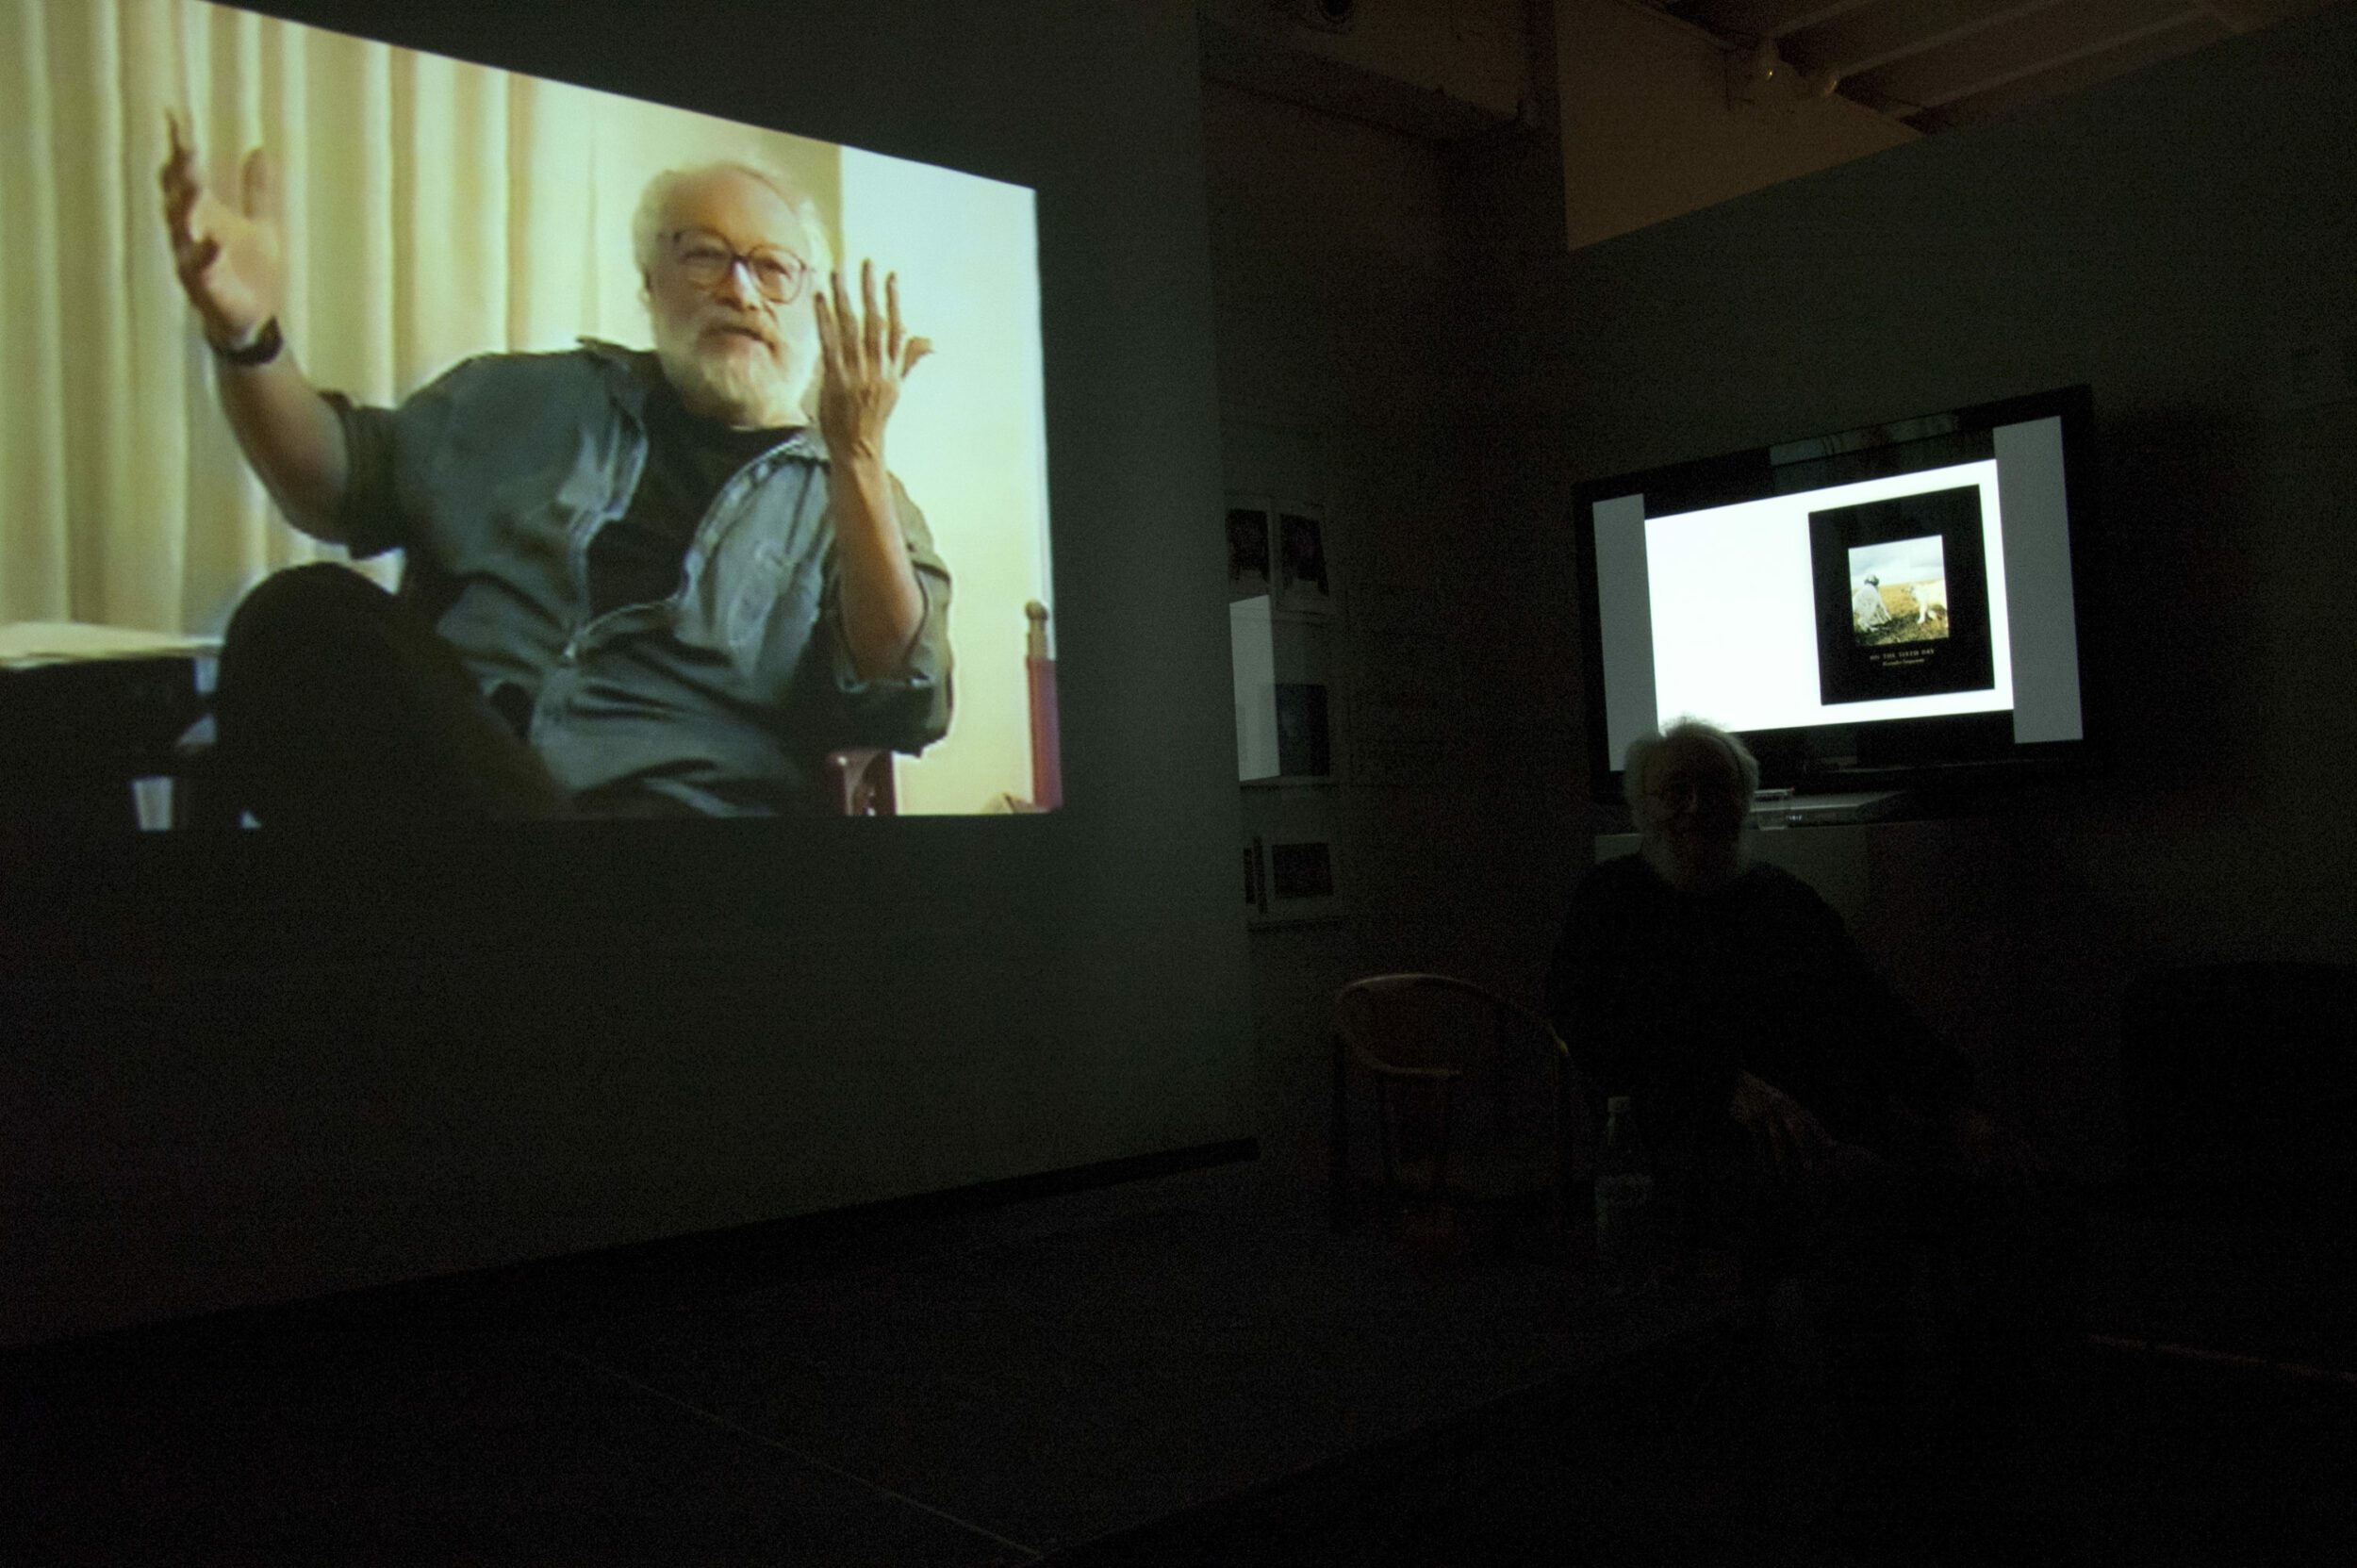 The evening began with a five minute video from my teaching tapes